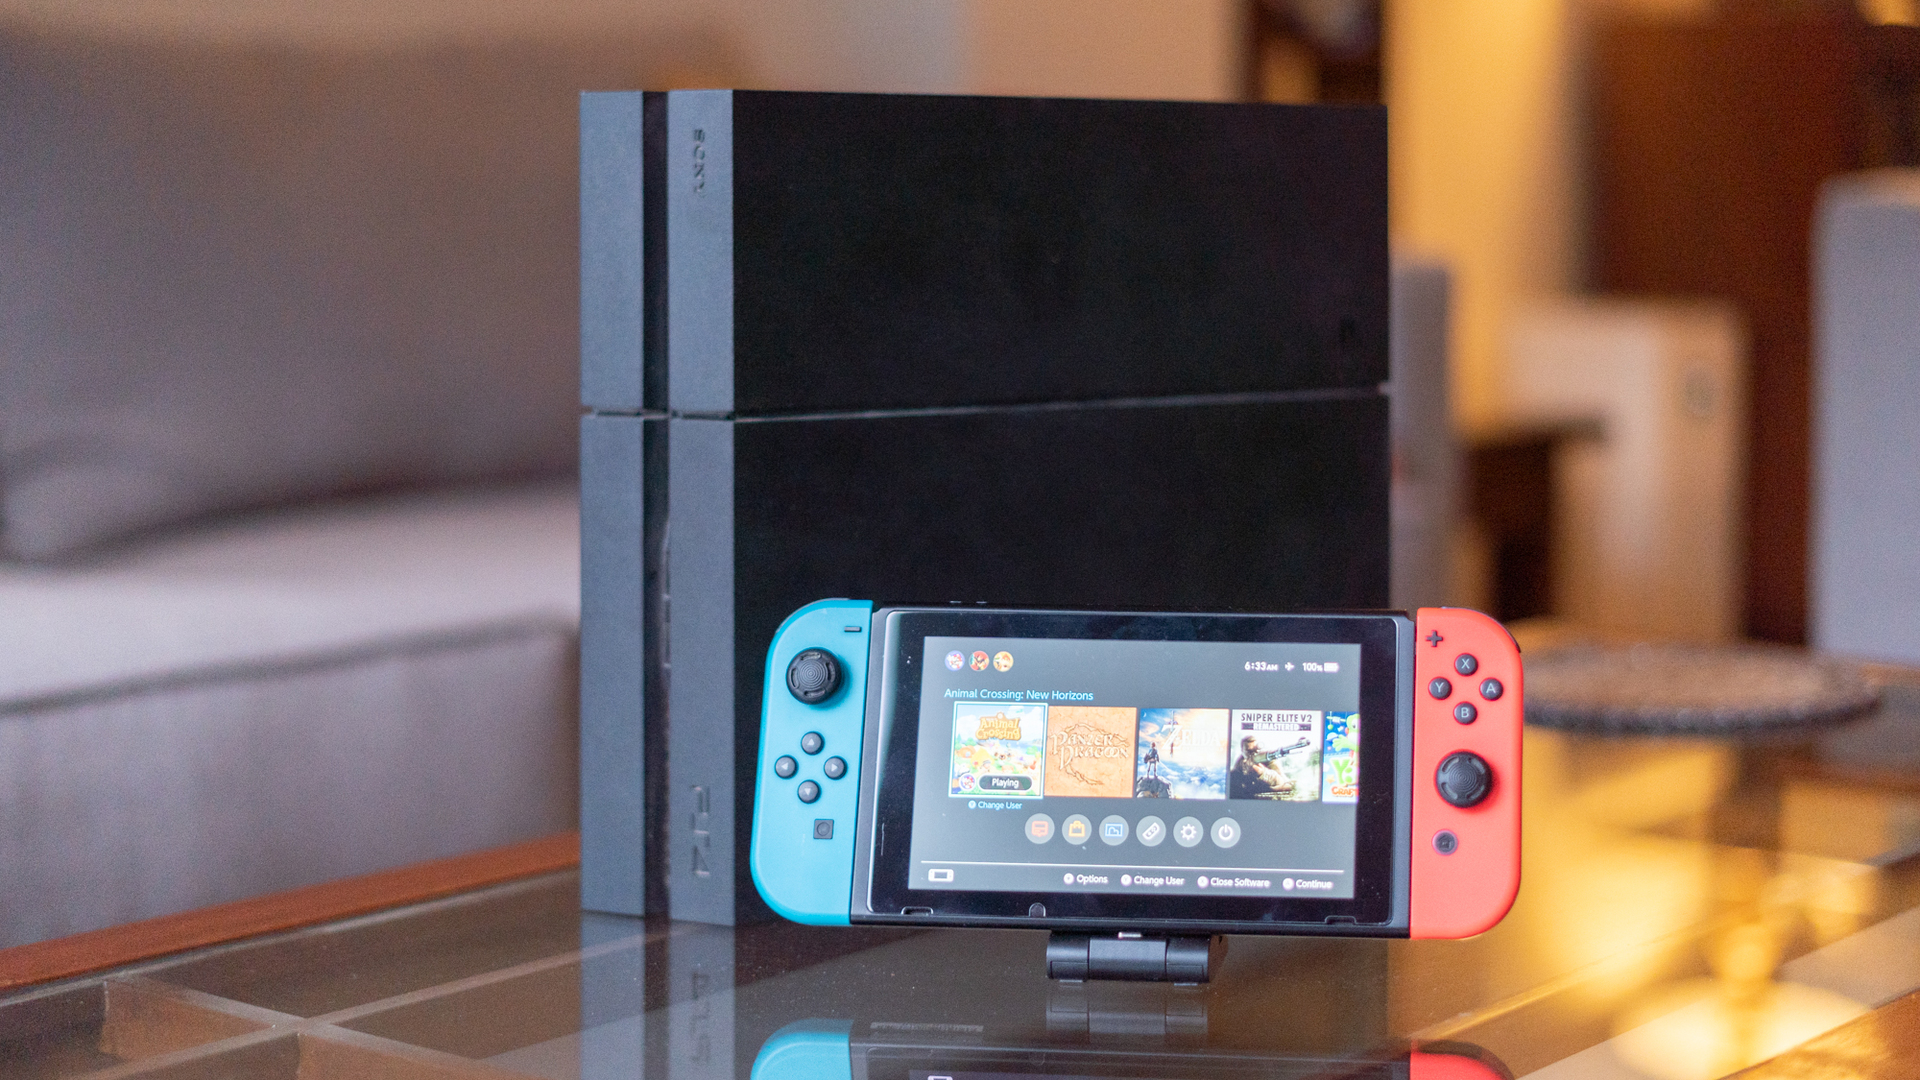 PlayStation 4 and Nintendo Switch front comparison shot